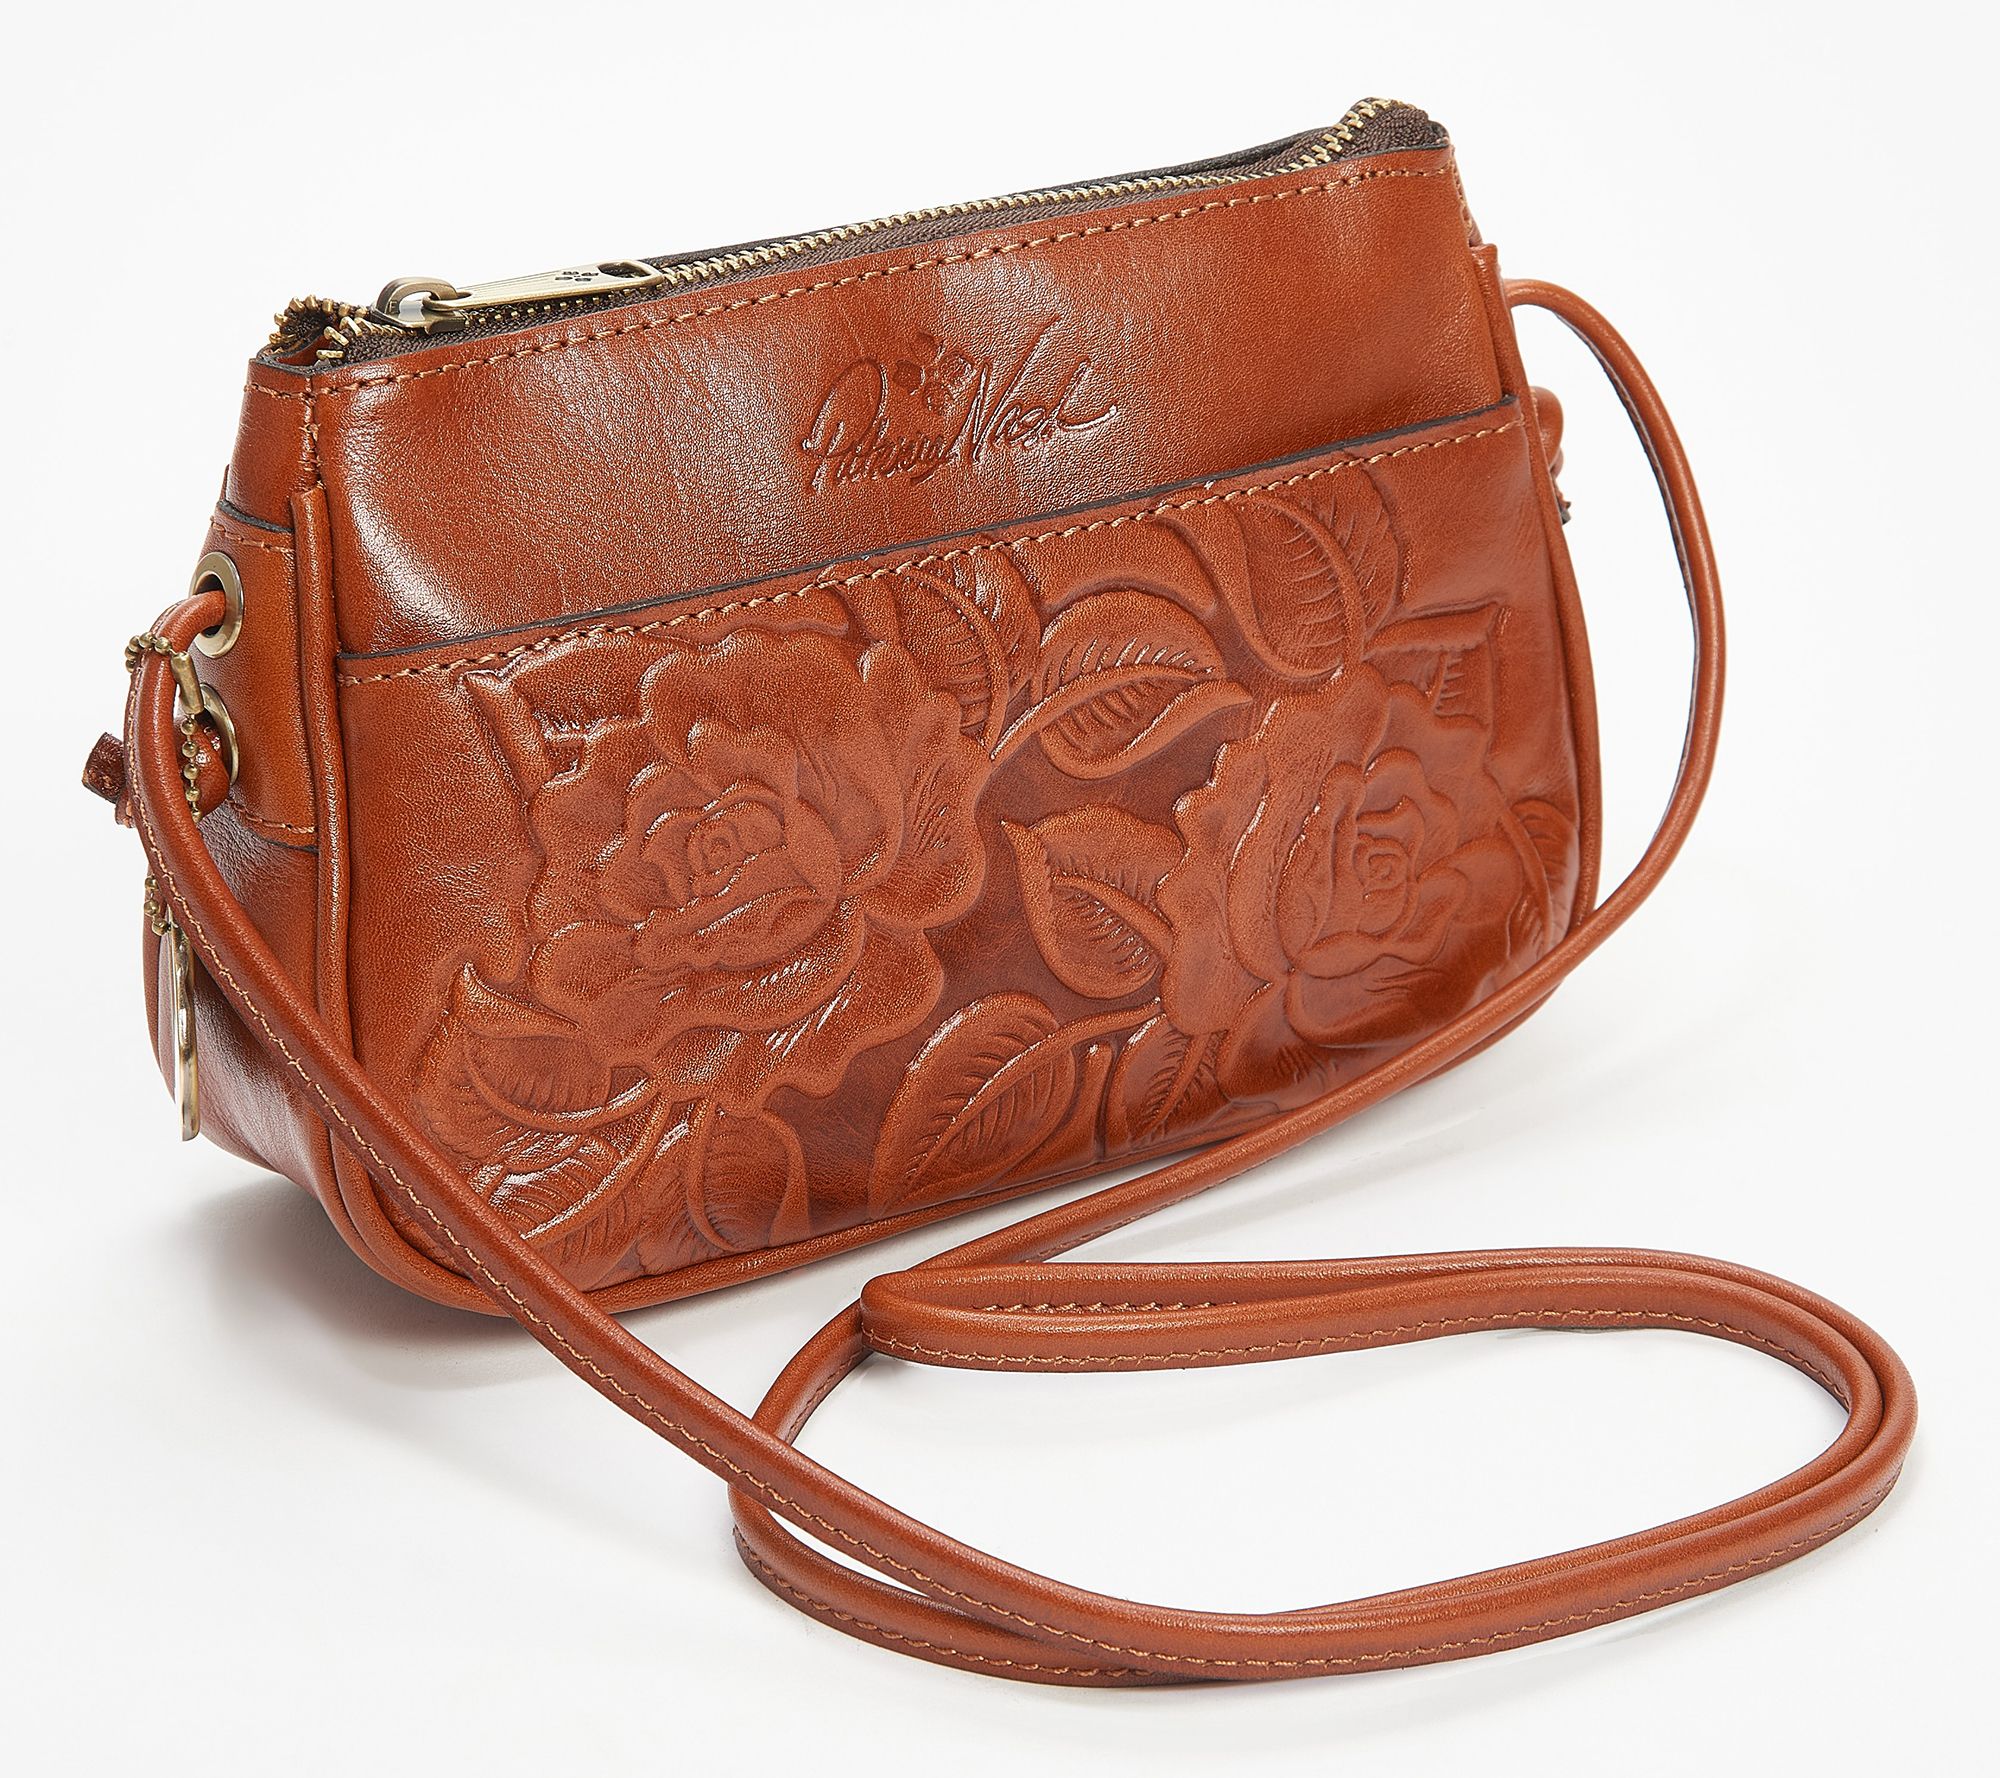 Hump Day Must Have: Dooney and Bourke Handbags - Lids